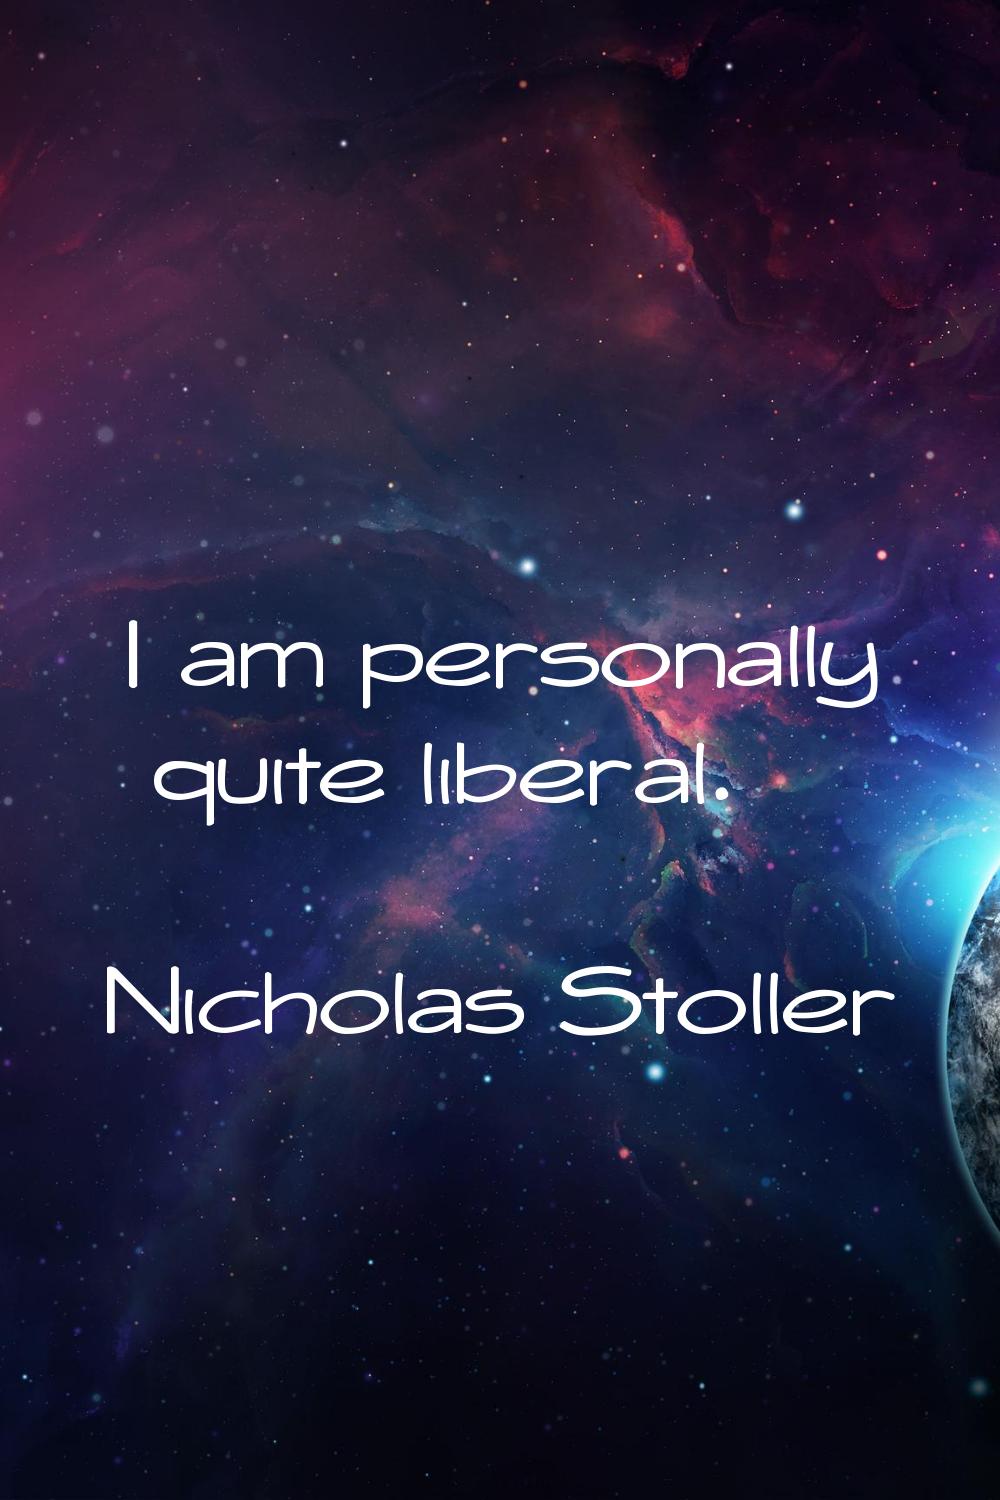 I am personally quite liberal.